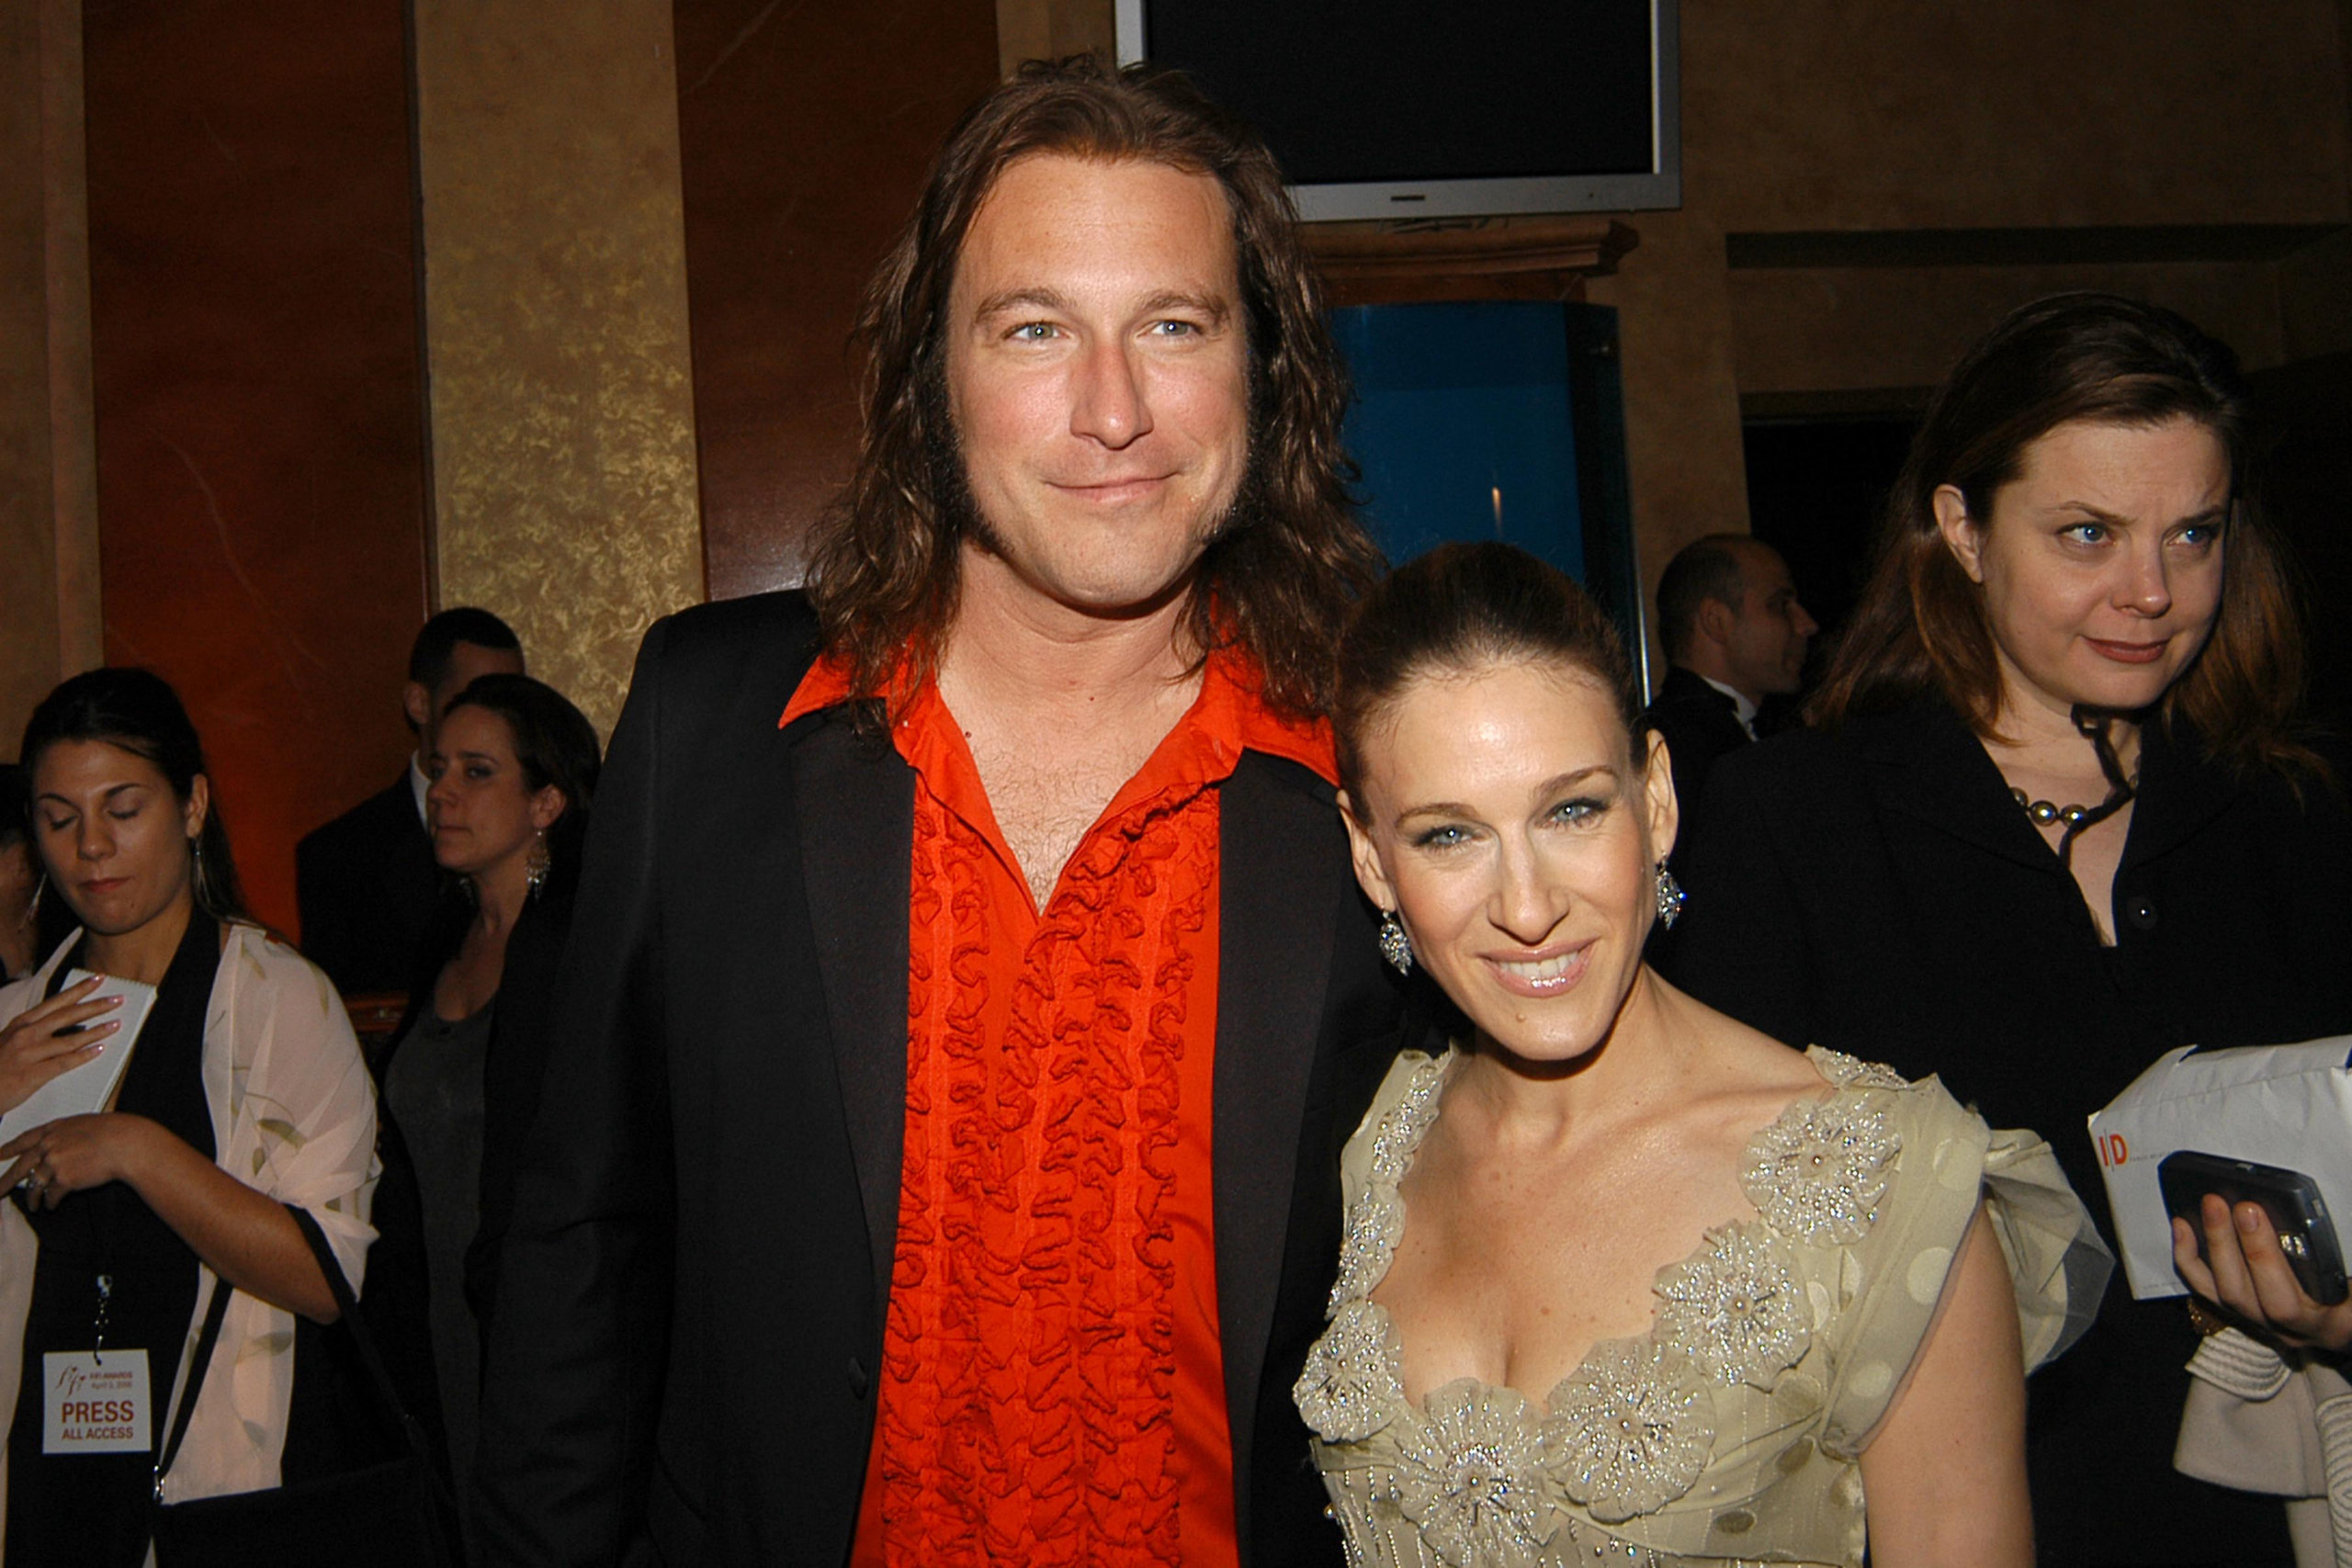 John Corbett and Sarah Jessica Parker during the Sex and the City days in 2006